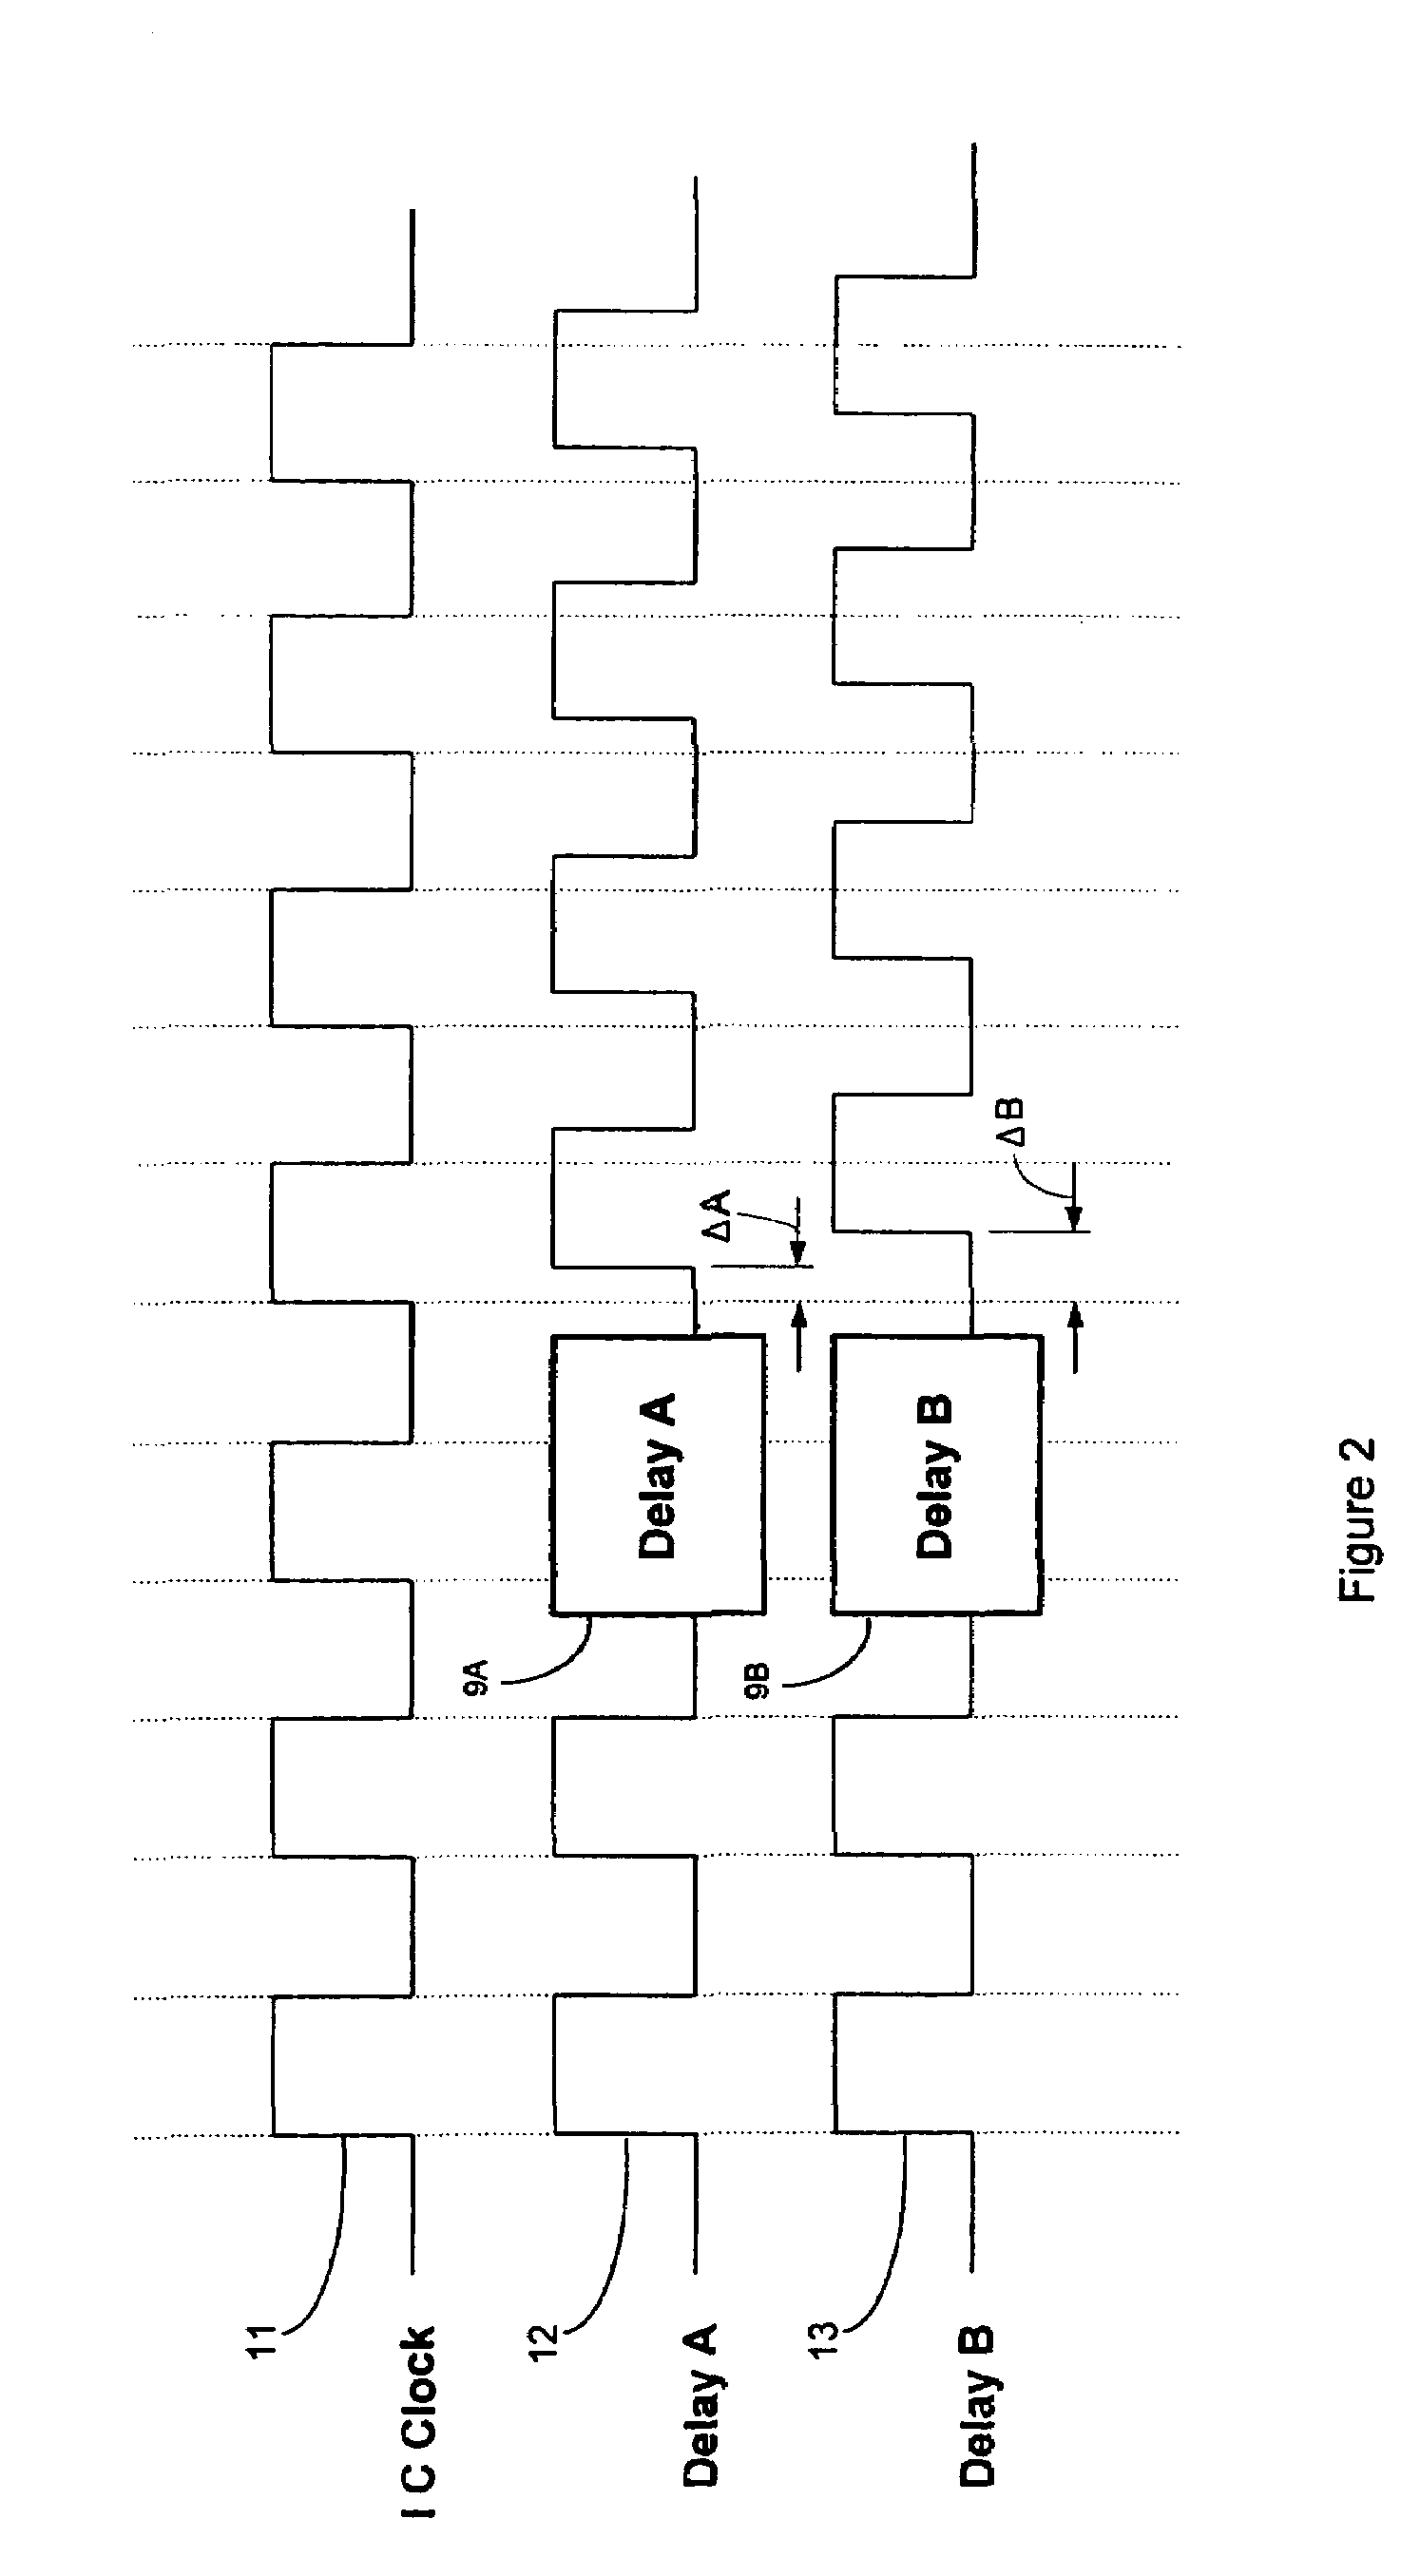 Method to reduce inductive effects of current variations by internal clock phase shifting